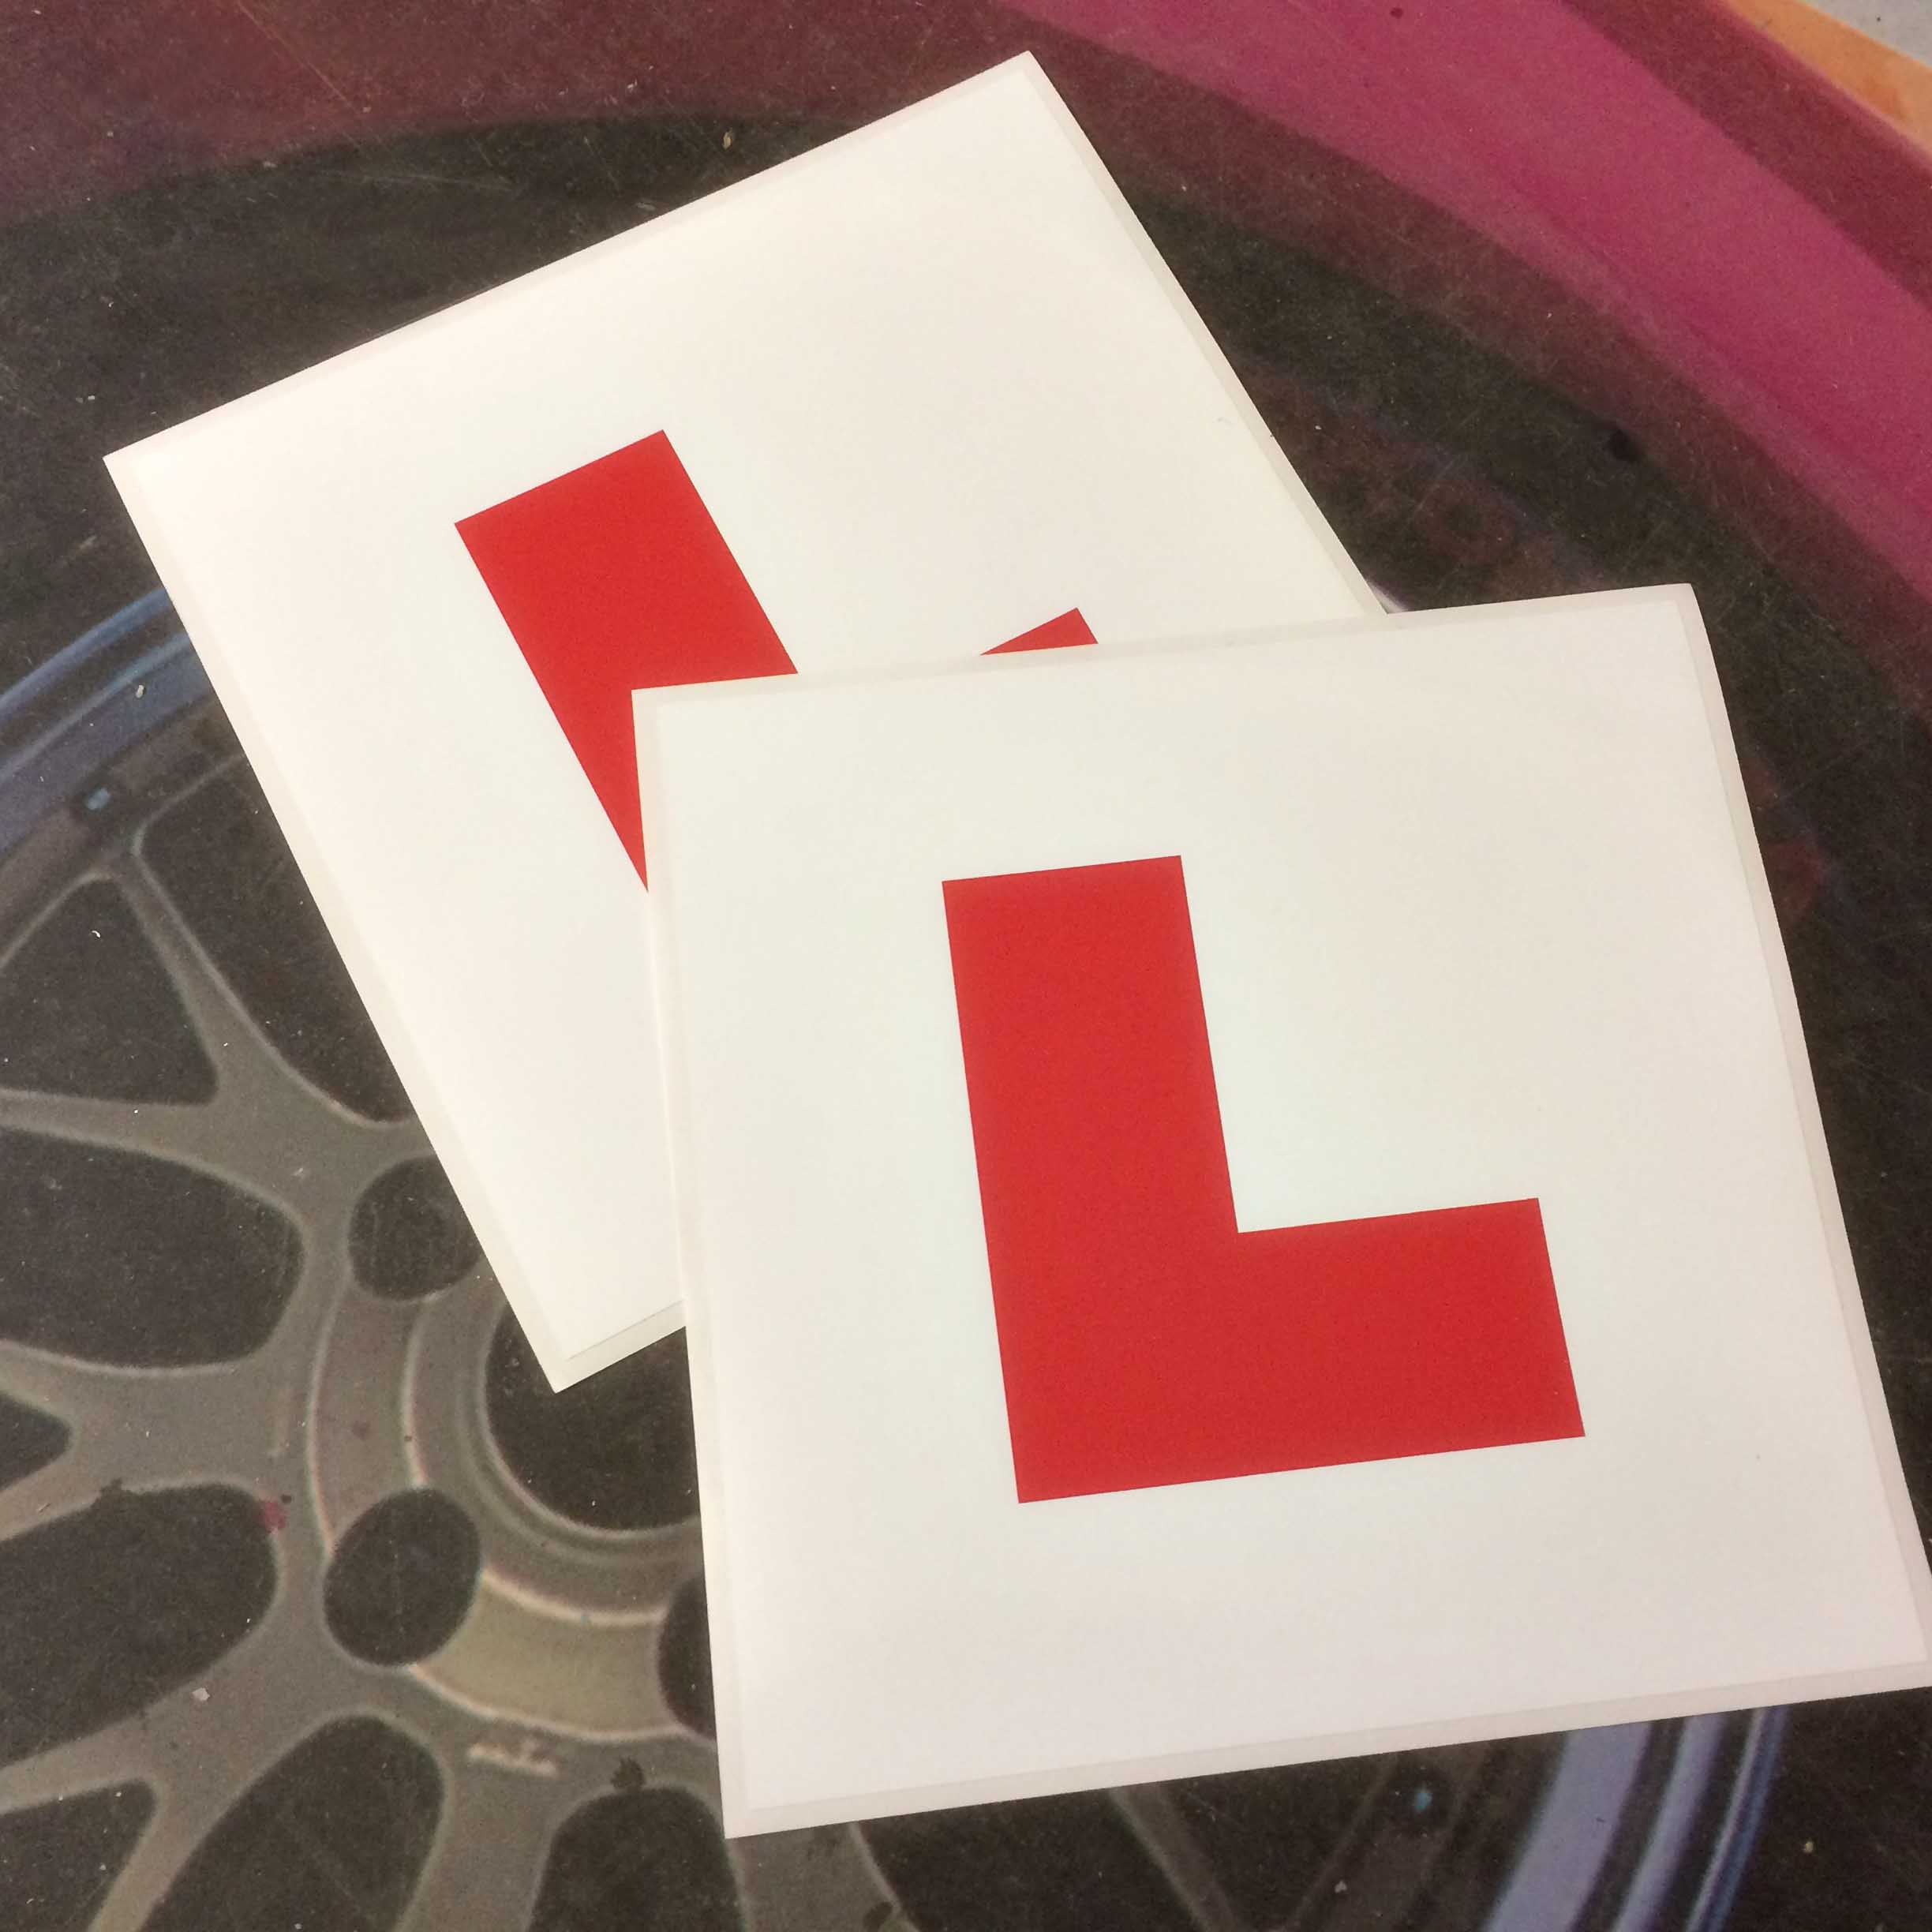 L PLATE LEARNER DRIVER STICKERS. Capital L in red on a white bakground.